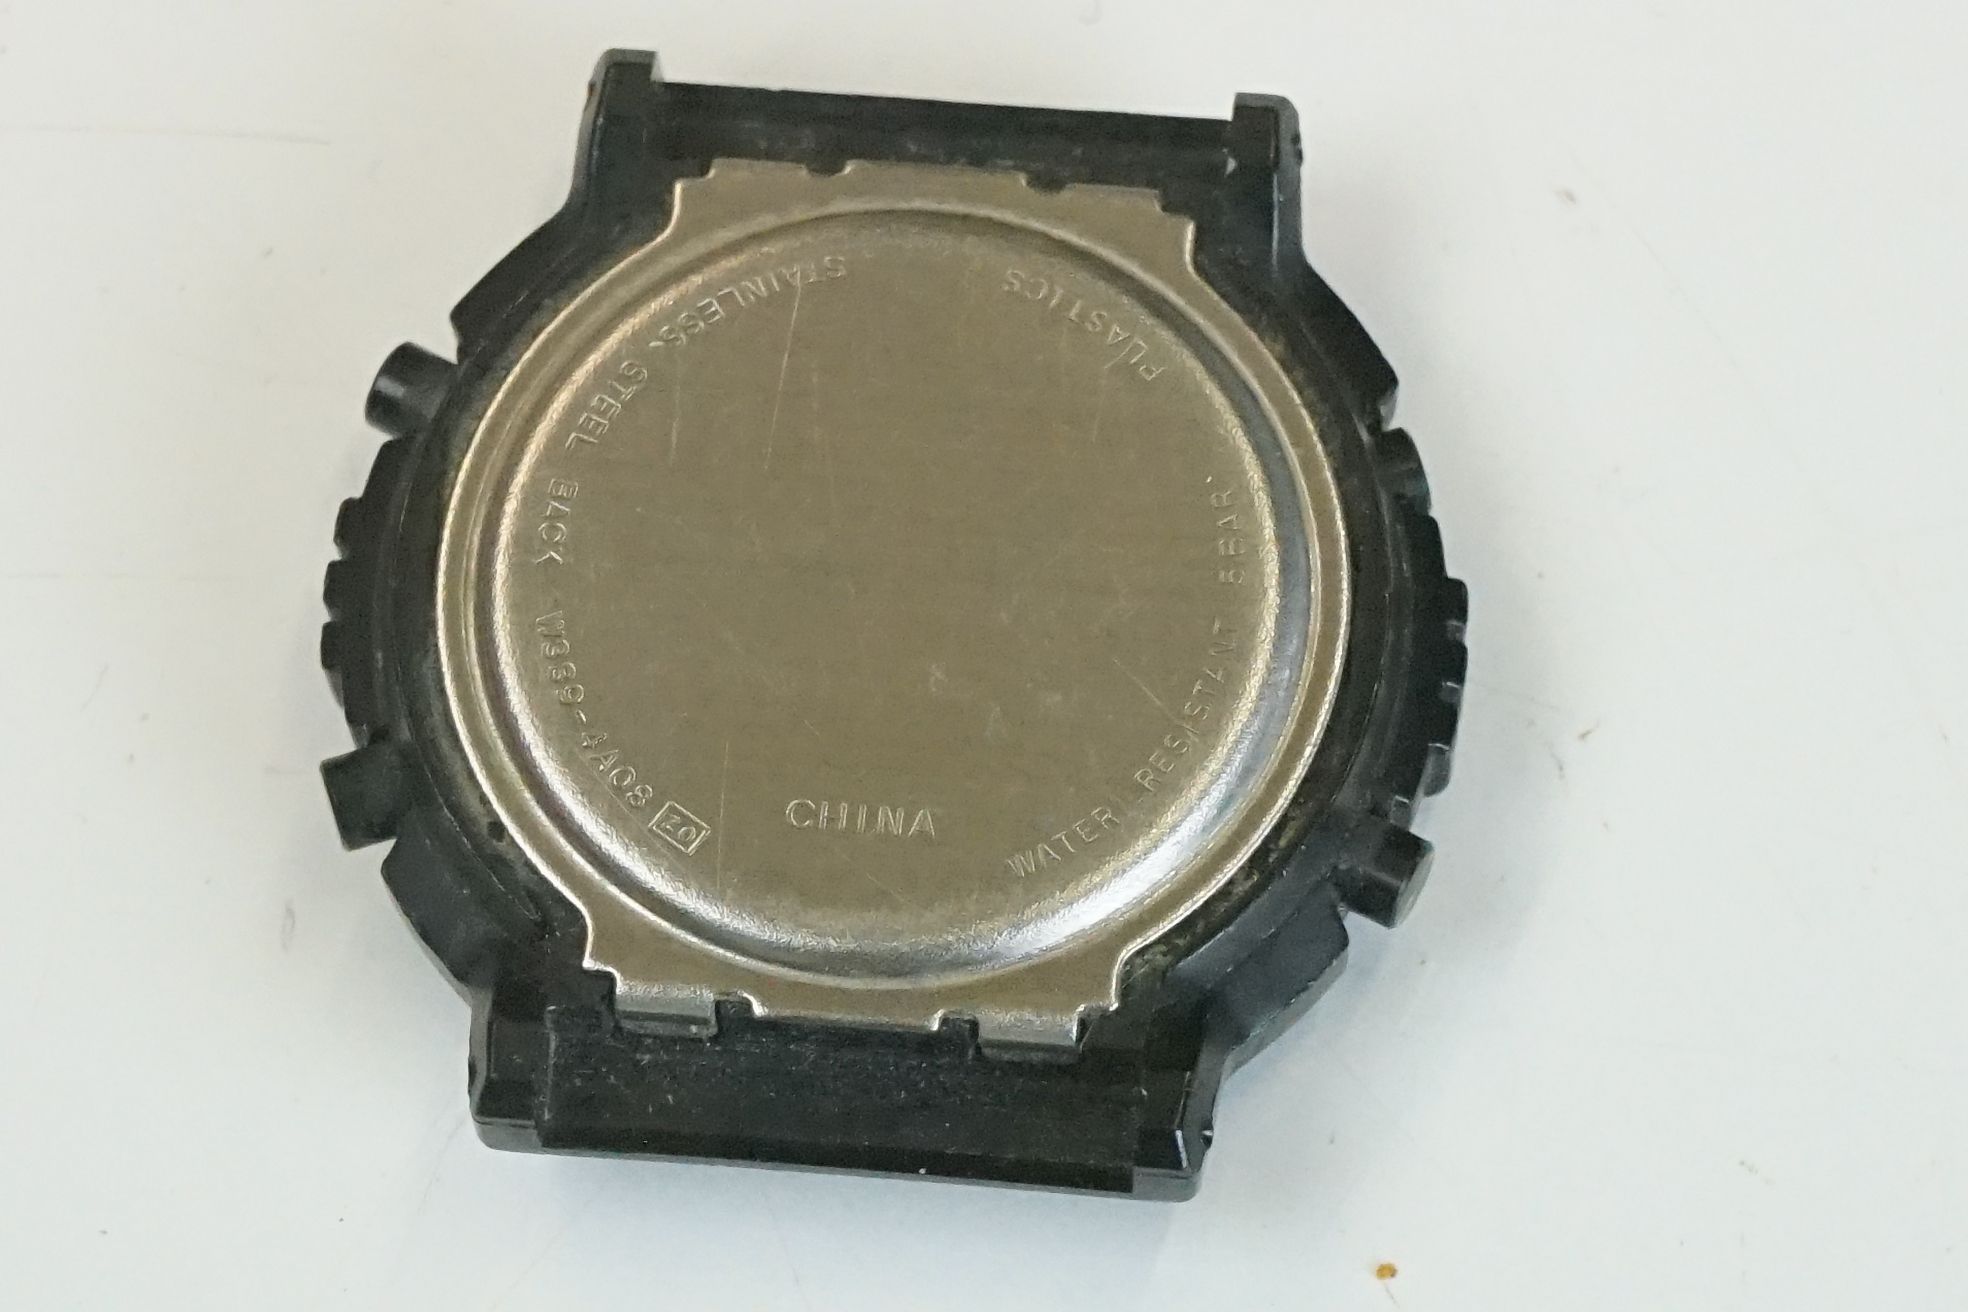 Collection of LCD Watches including Seiko, Casio, Lambda, etc - Image 10 of 14